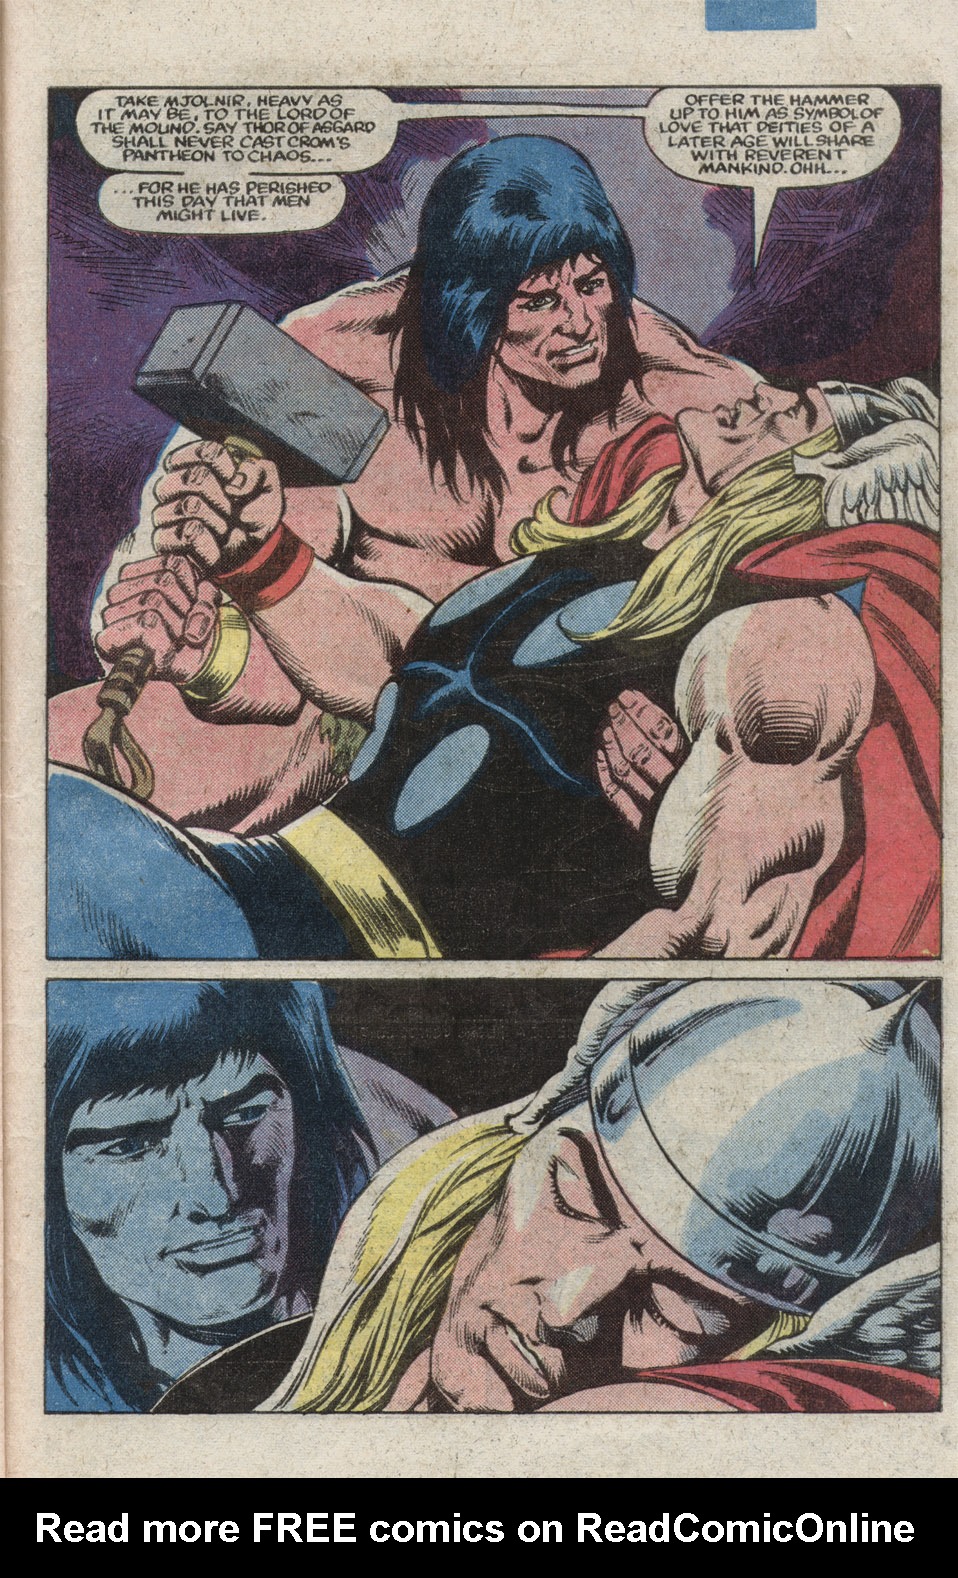 What If? (1977) issue 39 - Thor battled conan - Page 43